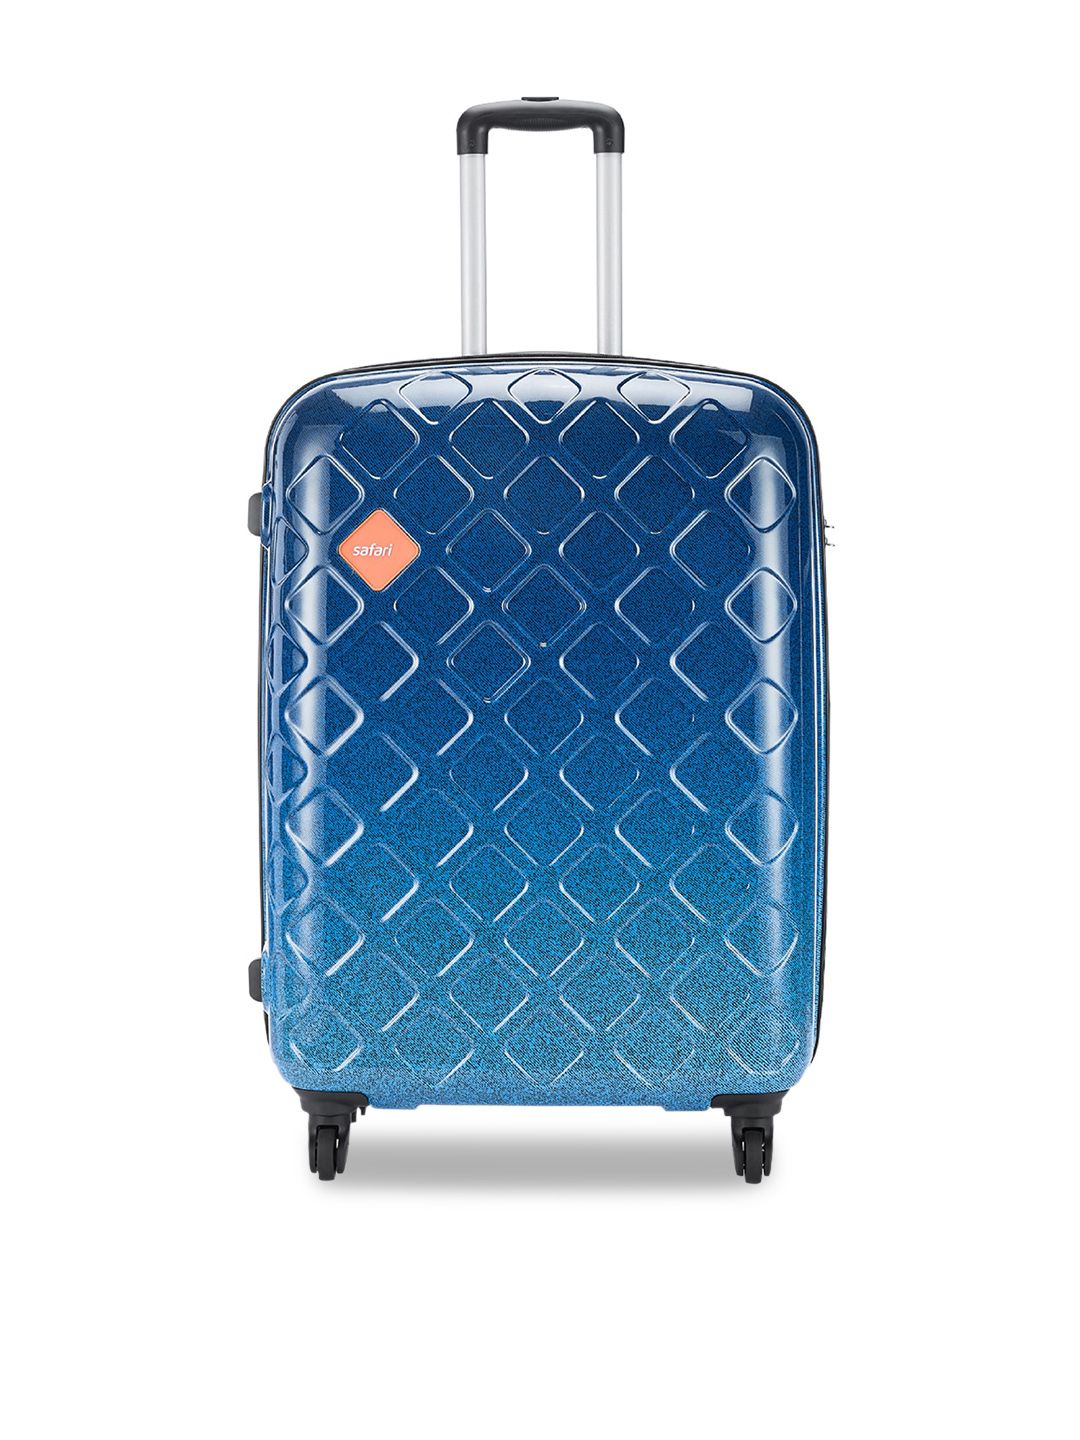 Safari Blue Mosaic Ombre Large Printed Polycarbonate Trolley Price in India